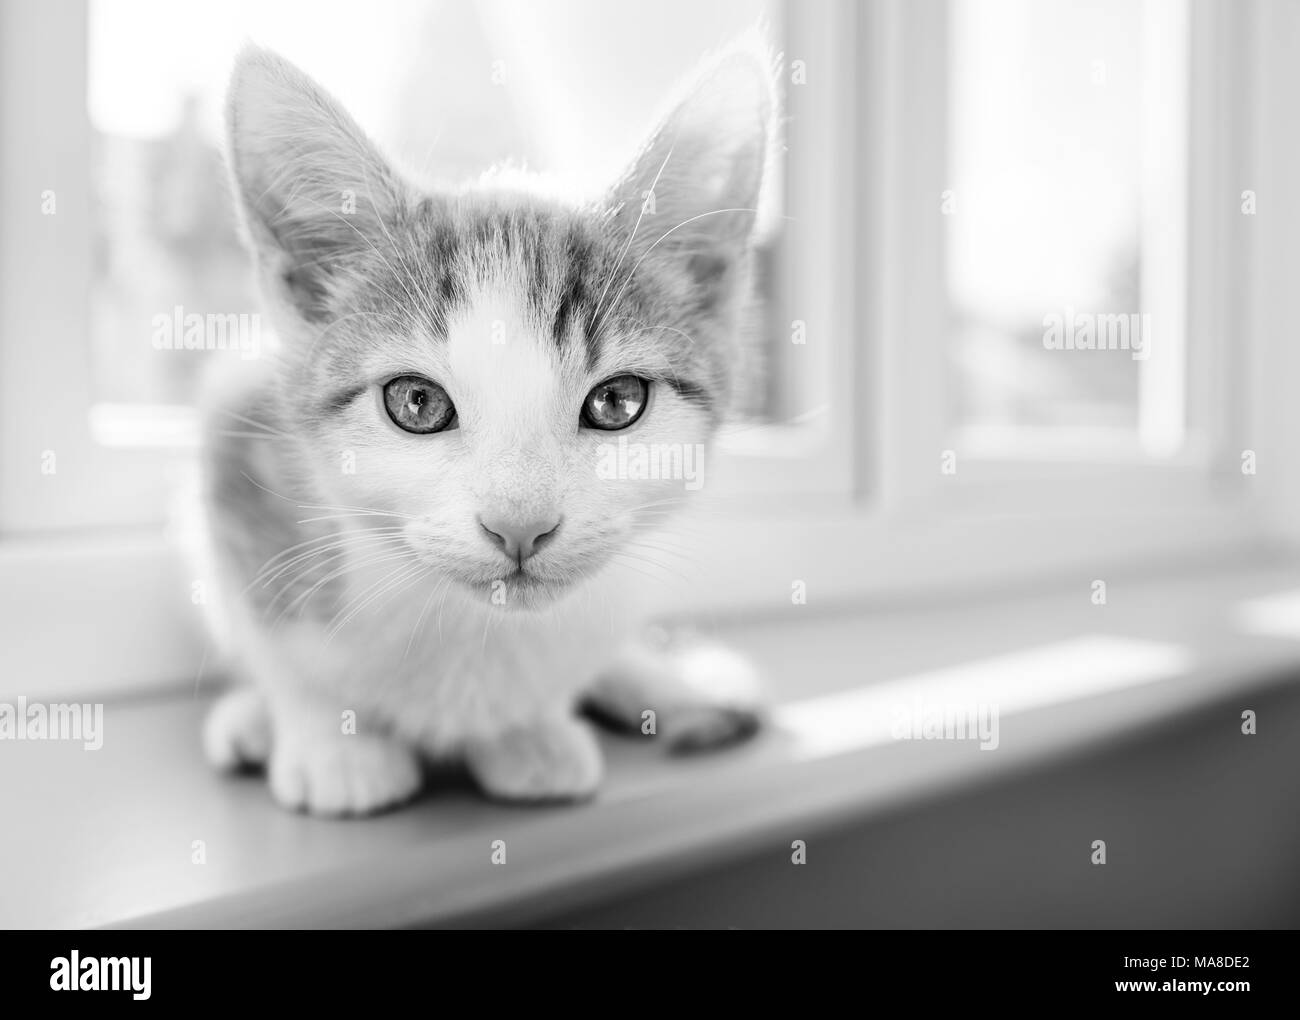 Curious young kitten on a windowsill looking directly at camera in black and white Stock Photo